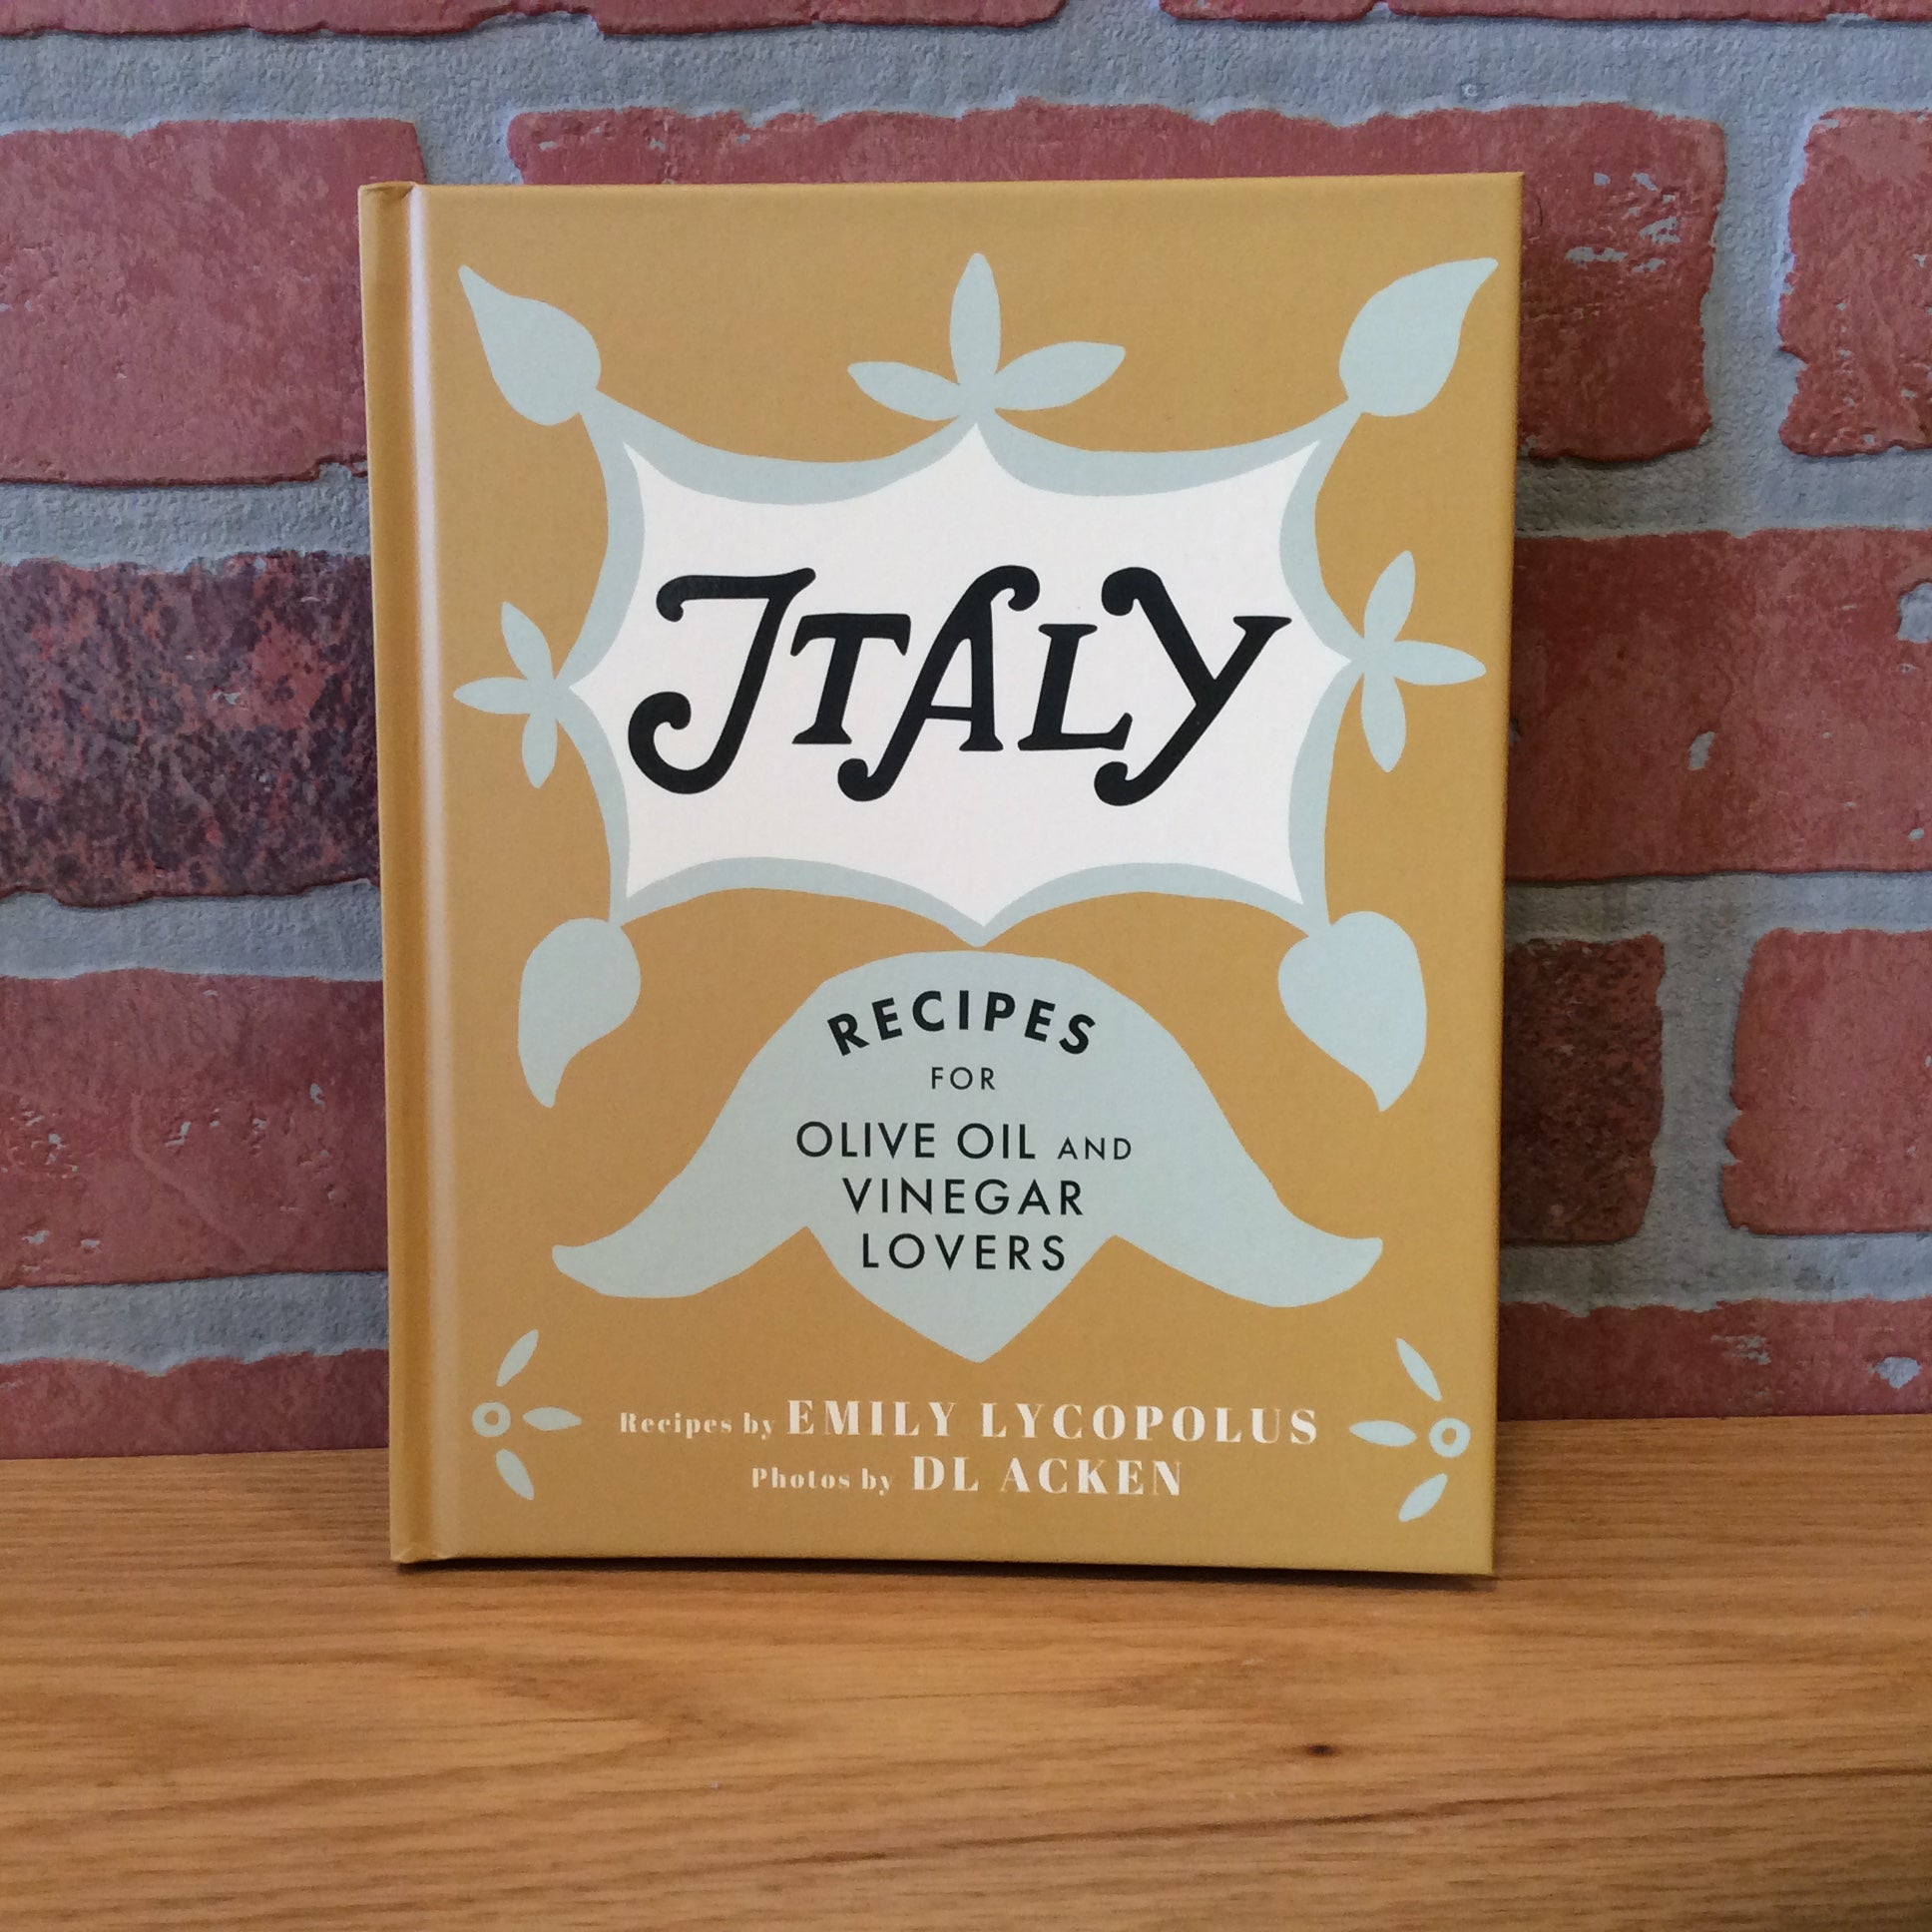 Italy: Recipes for Olive Oil and Vinegar Lovers by Emily Lycopolus